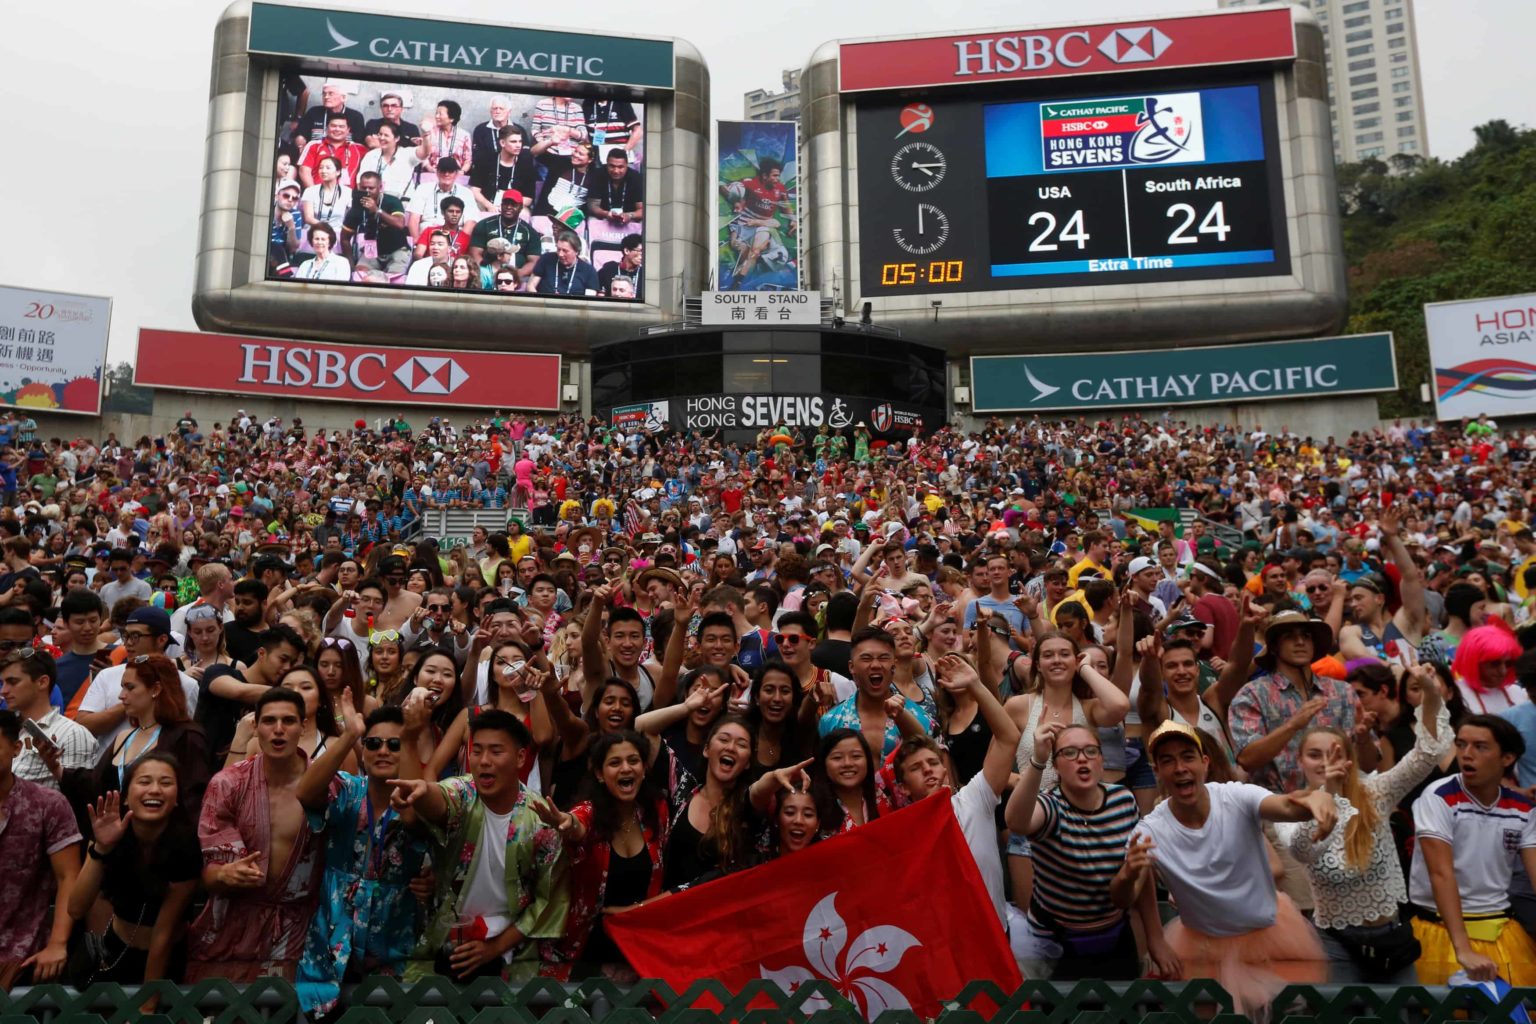 Provision Events and CSM Live Deliver For HSBC At The Hong Kong Sevens Event Industry News